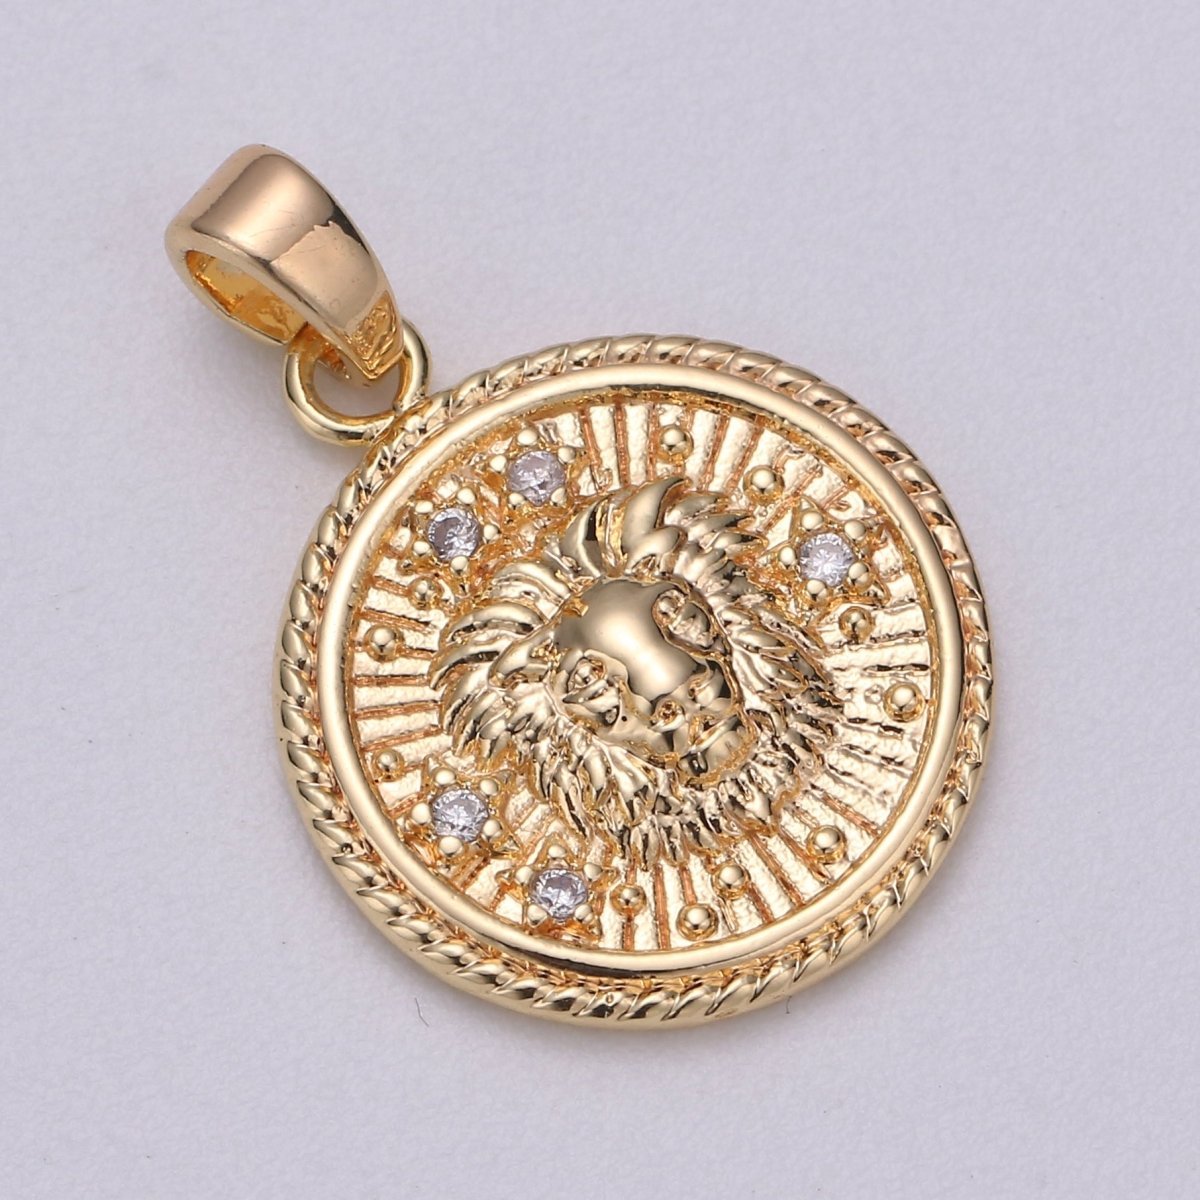 18K Gold Filled Zodiac Horoscope Sign Constellation Medallion Pendant Charm Textured Coin Decorative Edge for Necklace Jewelry Making | A-417-A-428 - DLUXCA